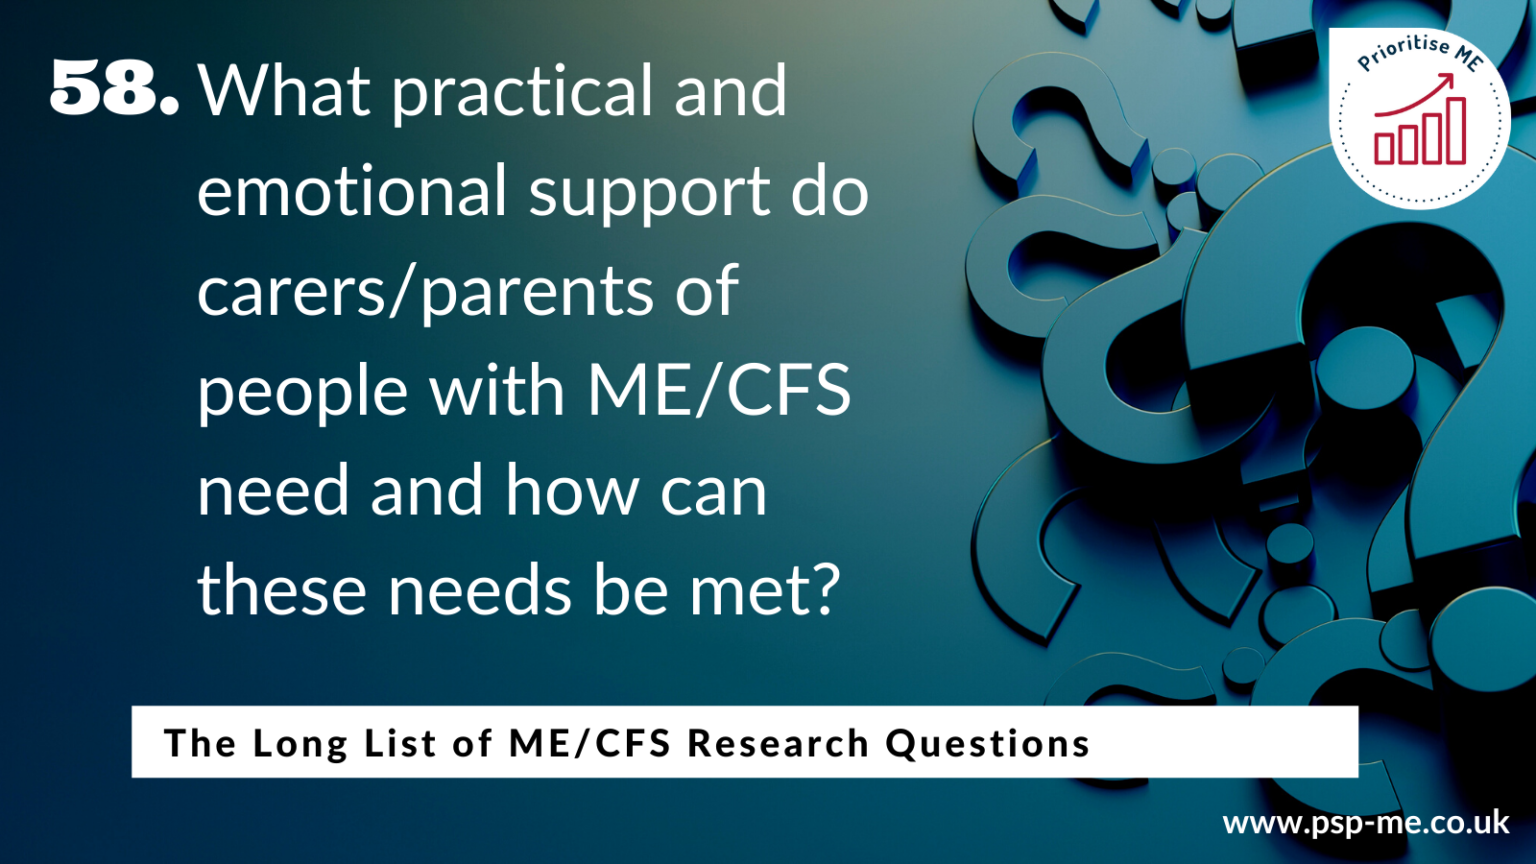 The Long List of ME_CFS Research Questions (58)